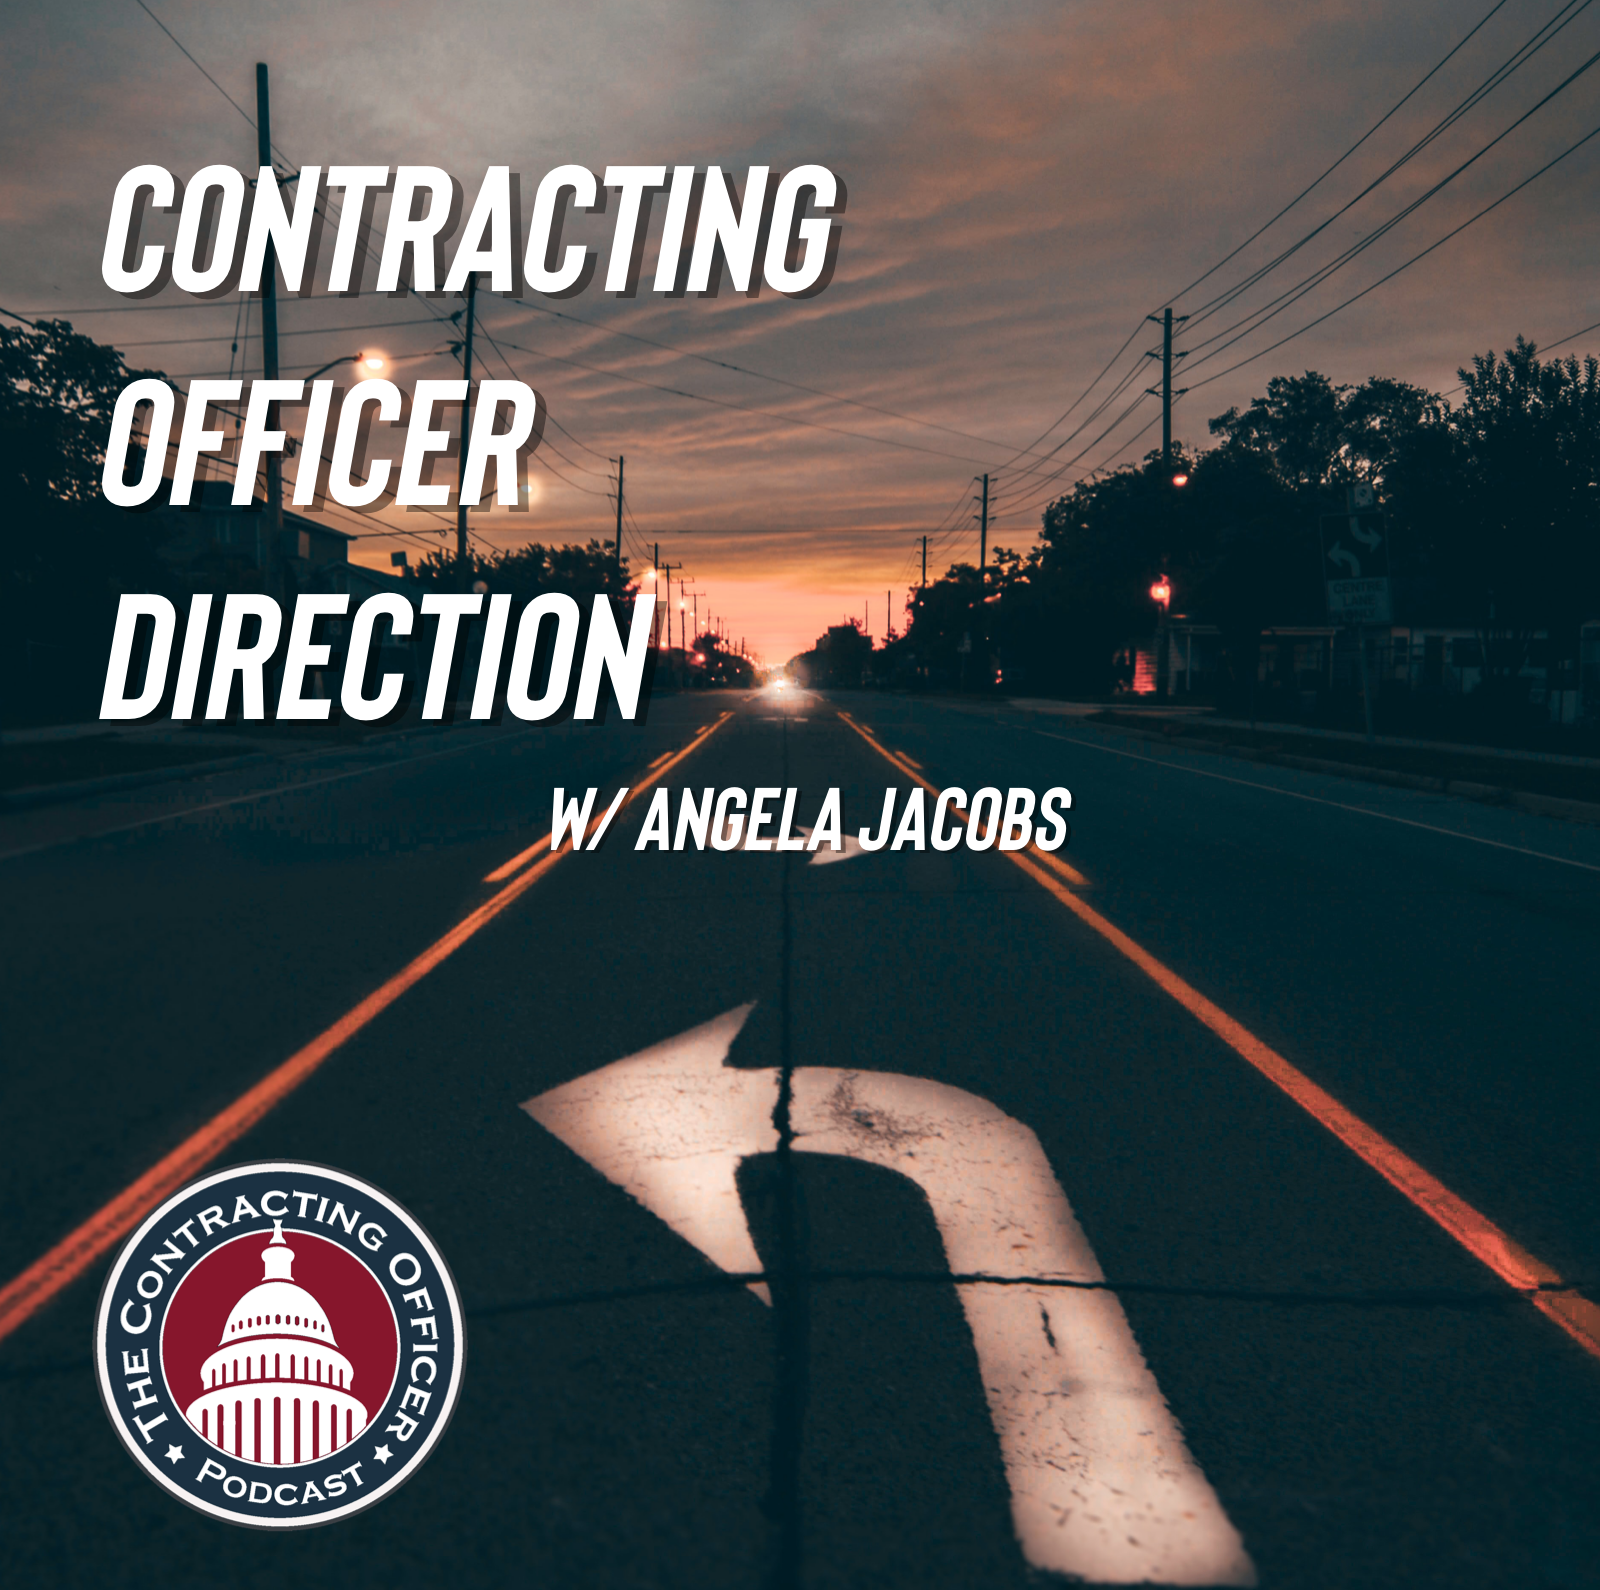 387 – Contracting Officer Direction w/Angela Jacobs